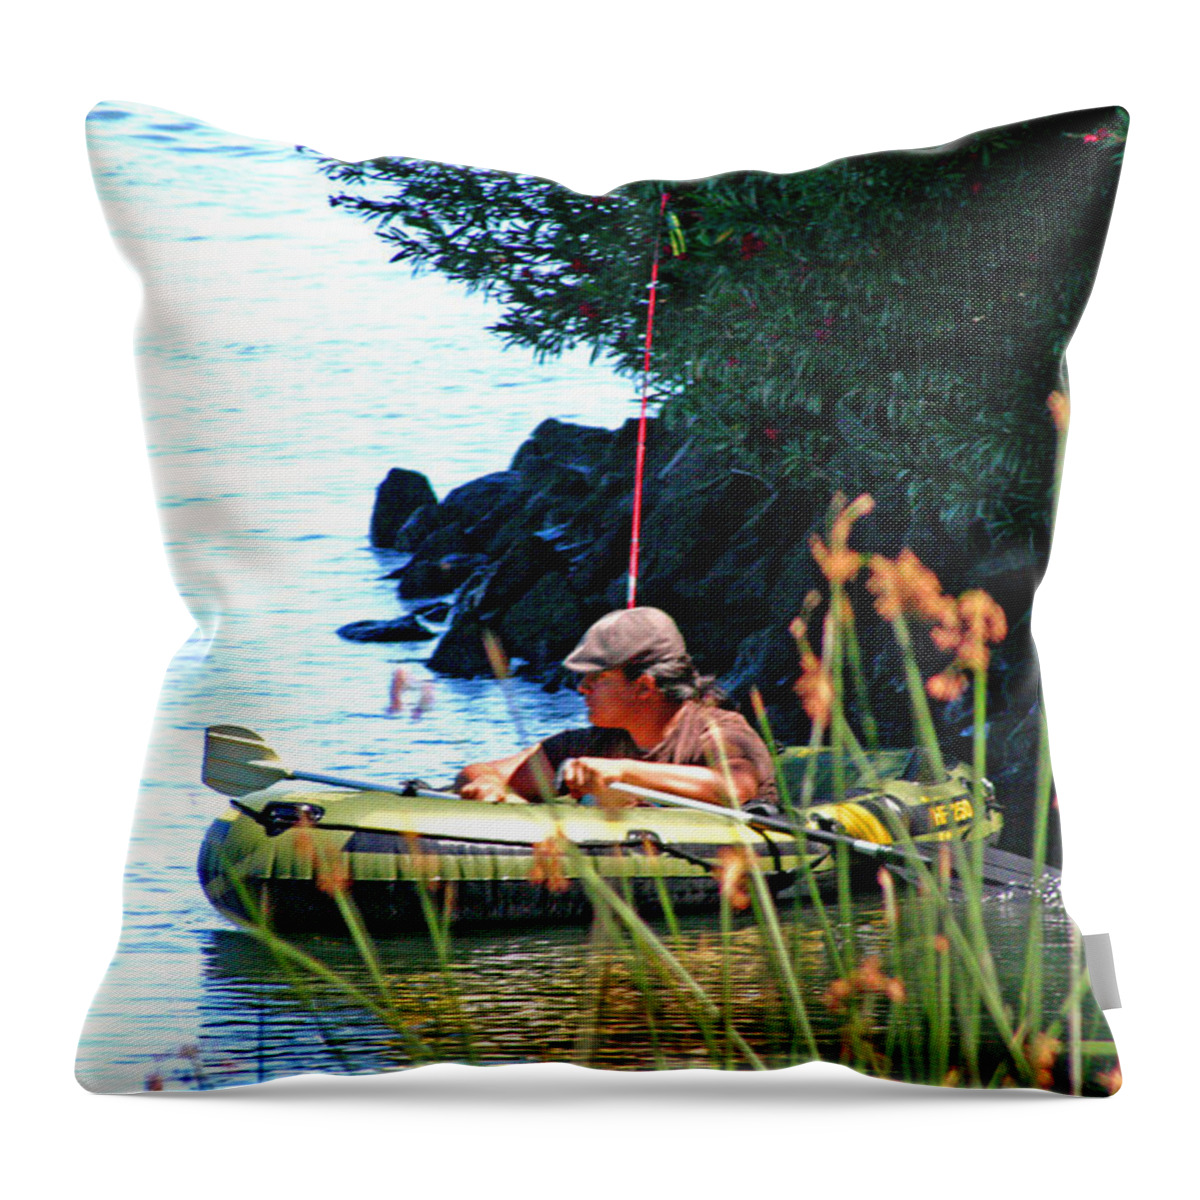 Sacramento River Delta Throw Pillow featuring the photograph Delta Fishing by Joseph Coulombe